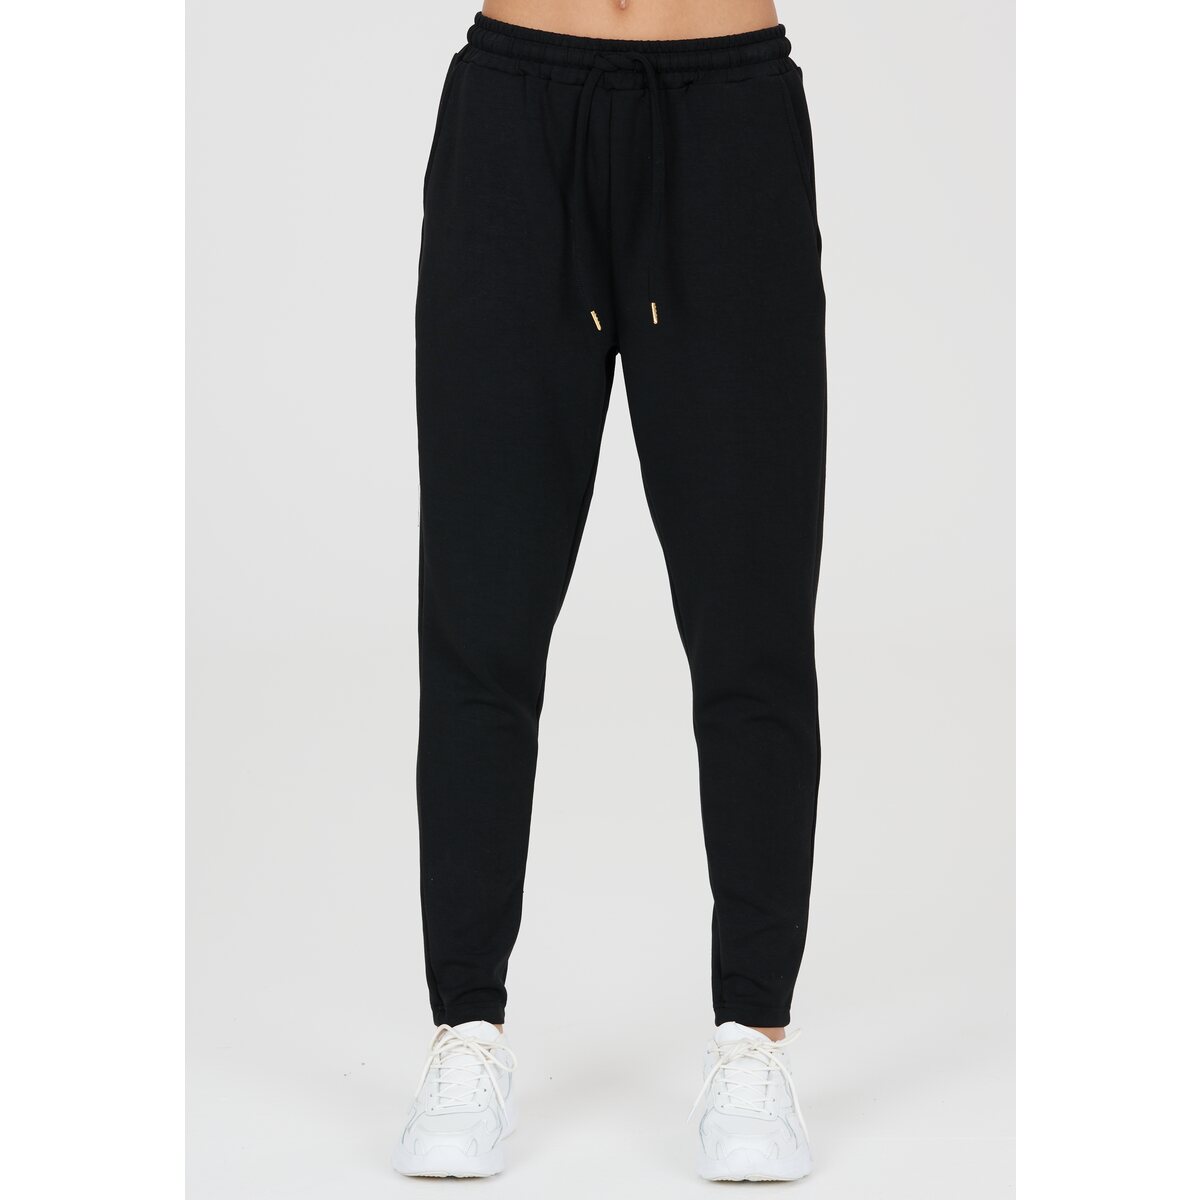 Athlecia Jacey V2 Womenswear Sweat Pants - Black 2 Shaws Department Stores